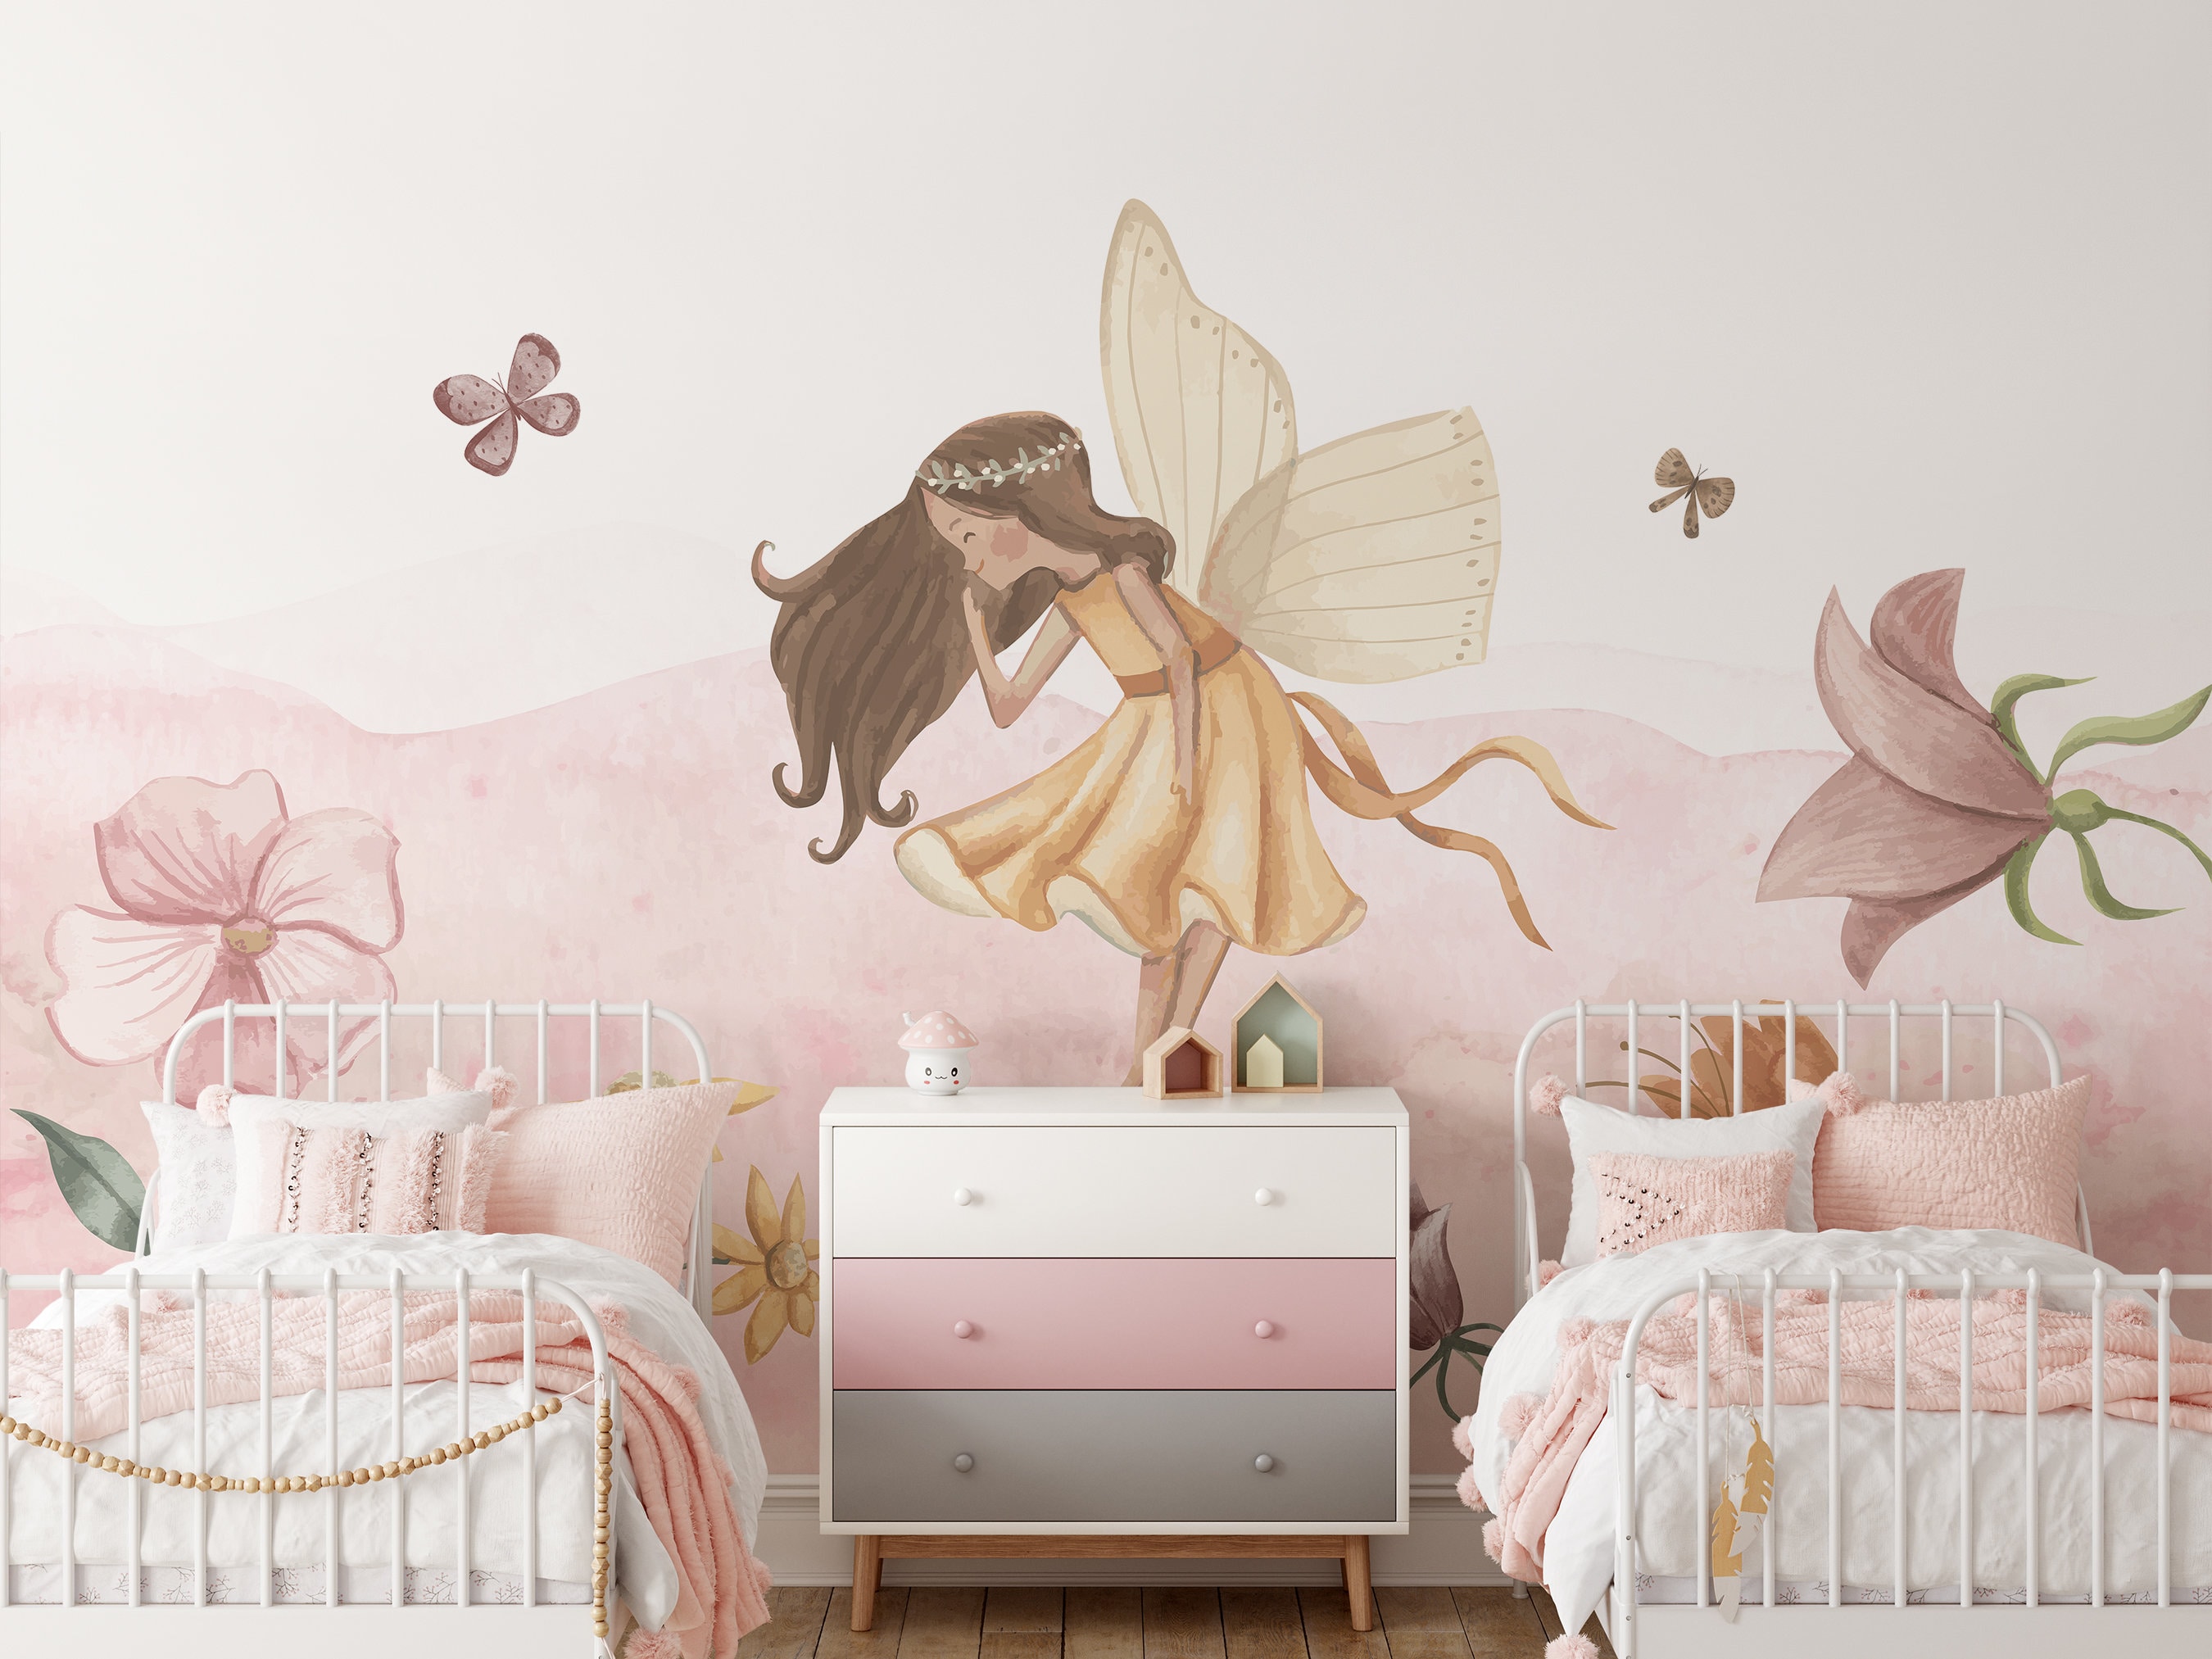 Nursery: Cute Seven Fairies Collection - Removable Wall Adhesive Decal